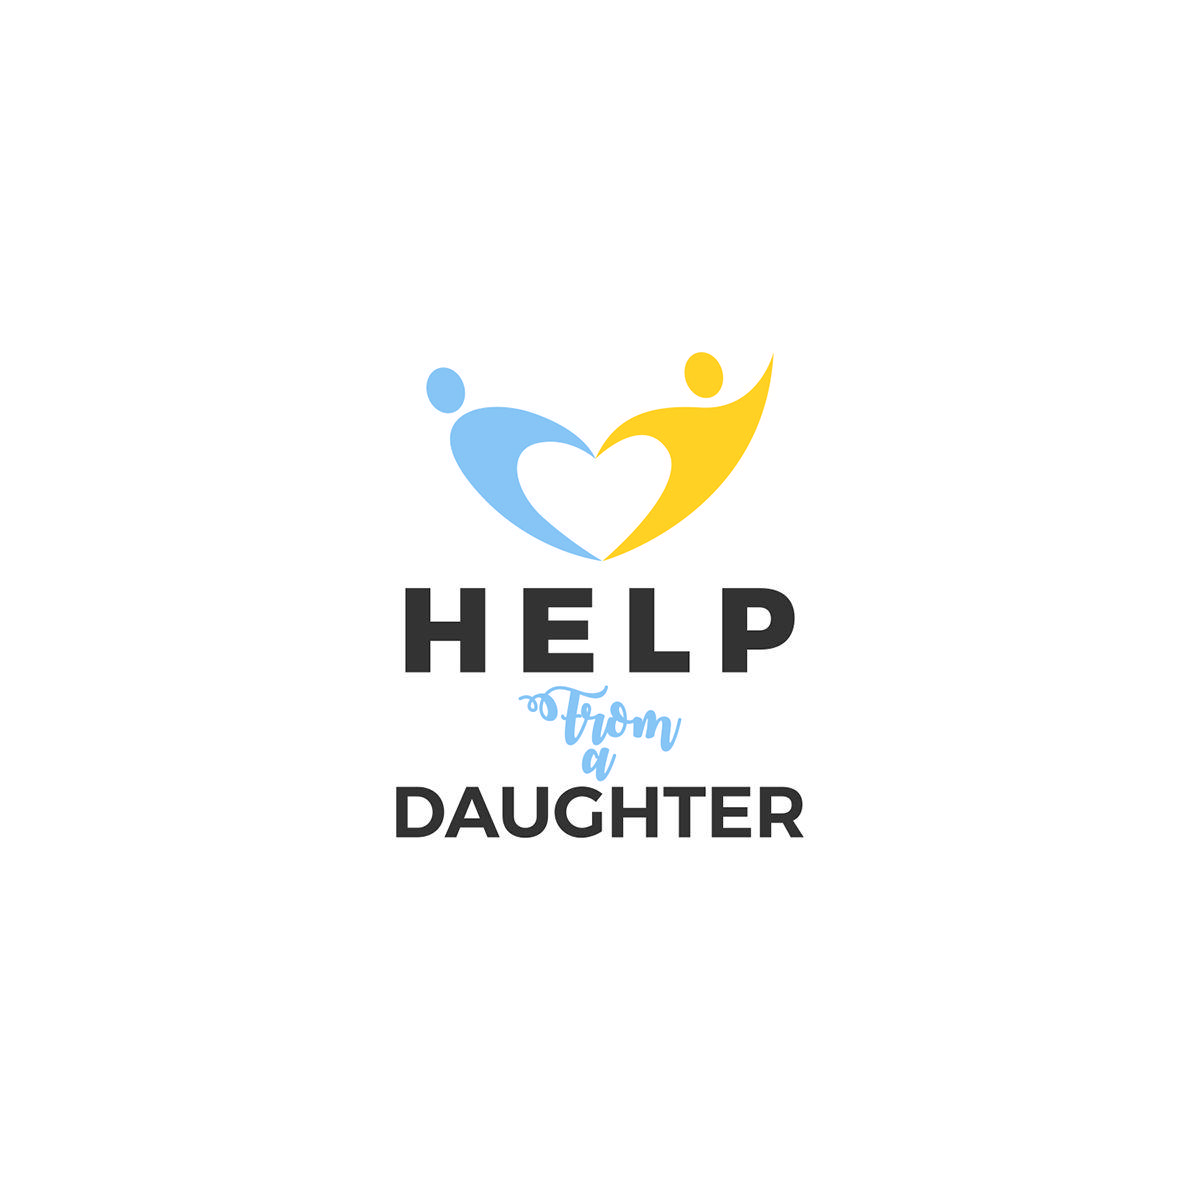 Daughter Logo - Elegant, Traditional, It Company Logo Design for Help From A ...